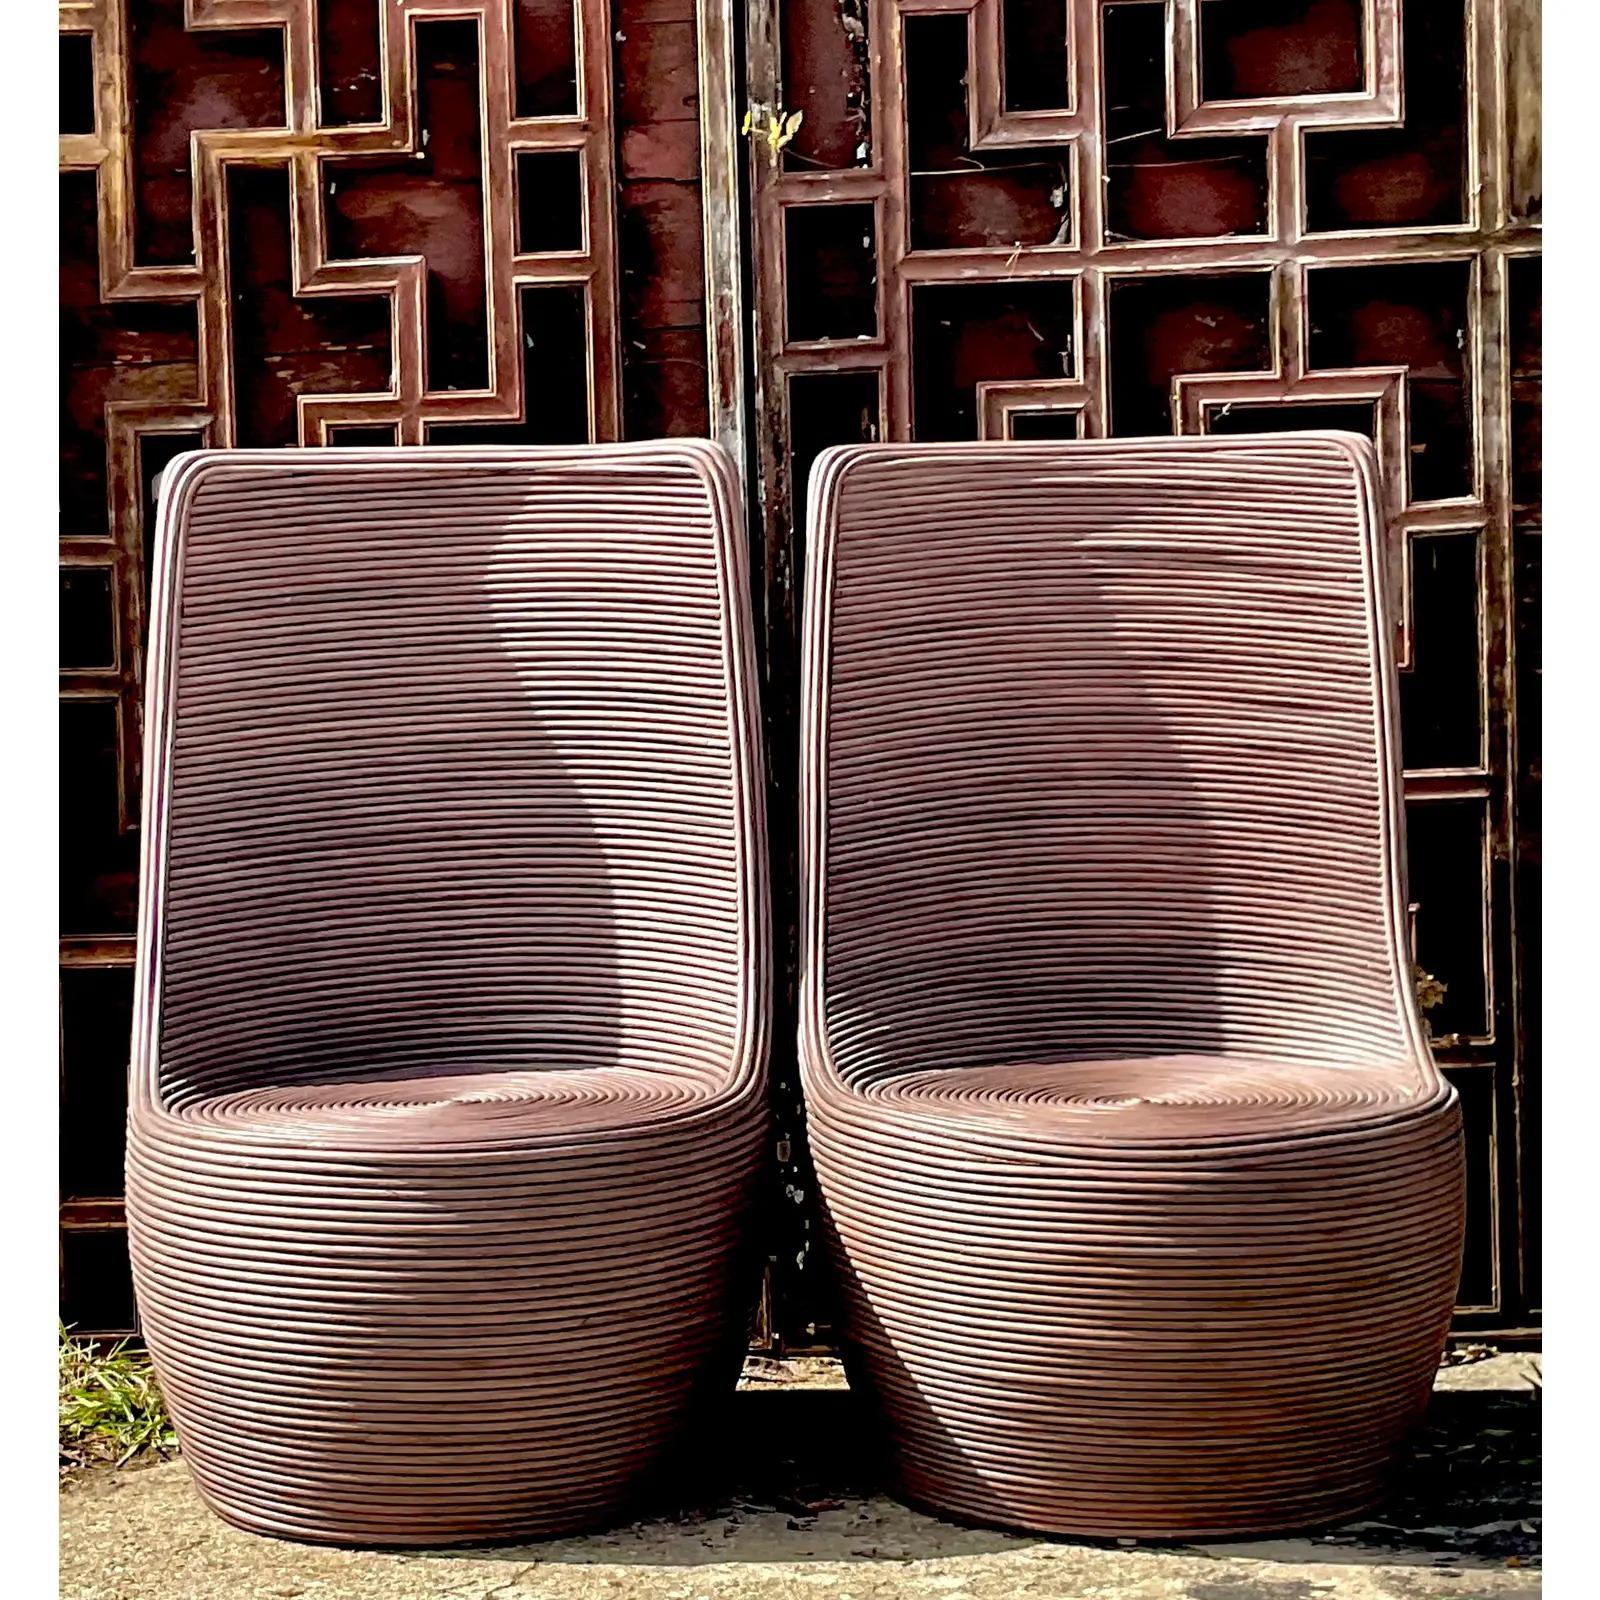 A gorgeous pair of Contemporary Coastal lounge chairs. Made from a chic coiled pencil reed in a warm chocolate brown finish. High blade back and wide seat. Acquired rom a Palm Beach estate.